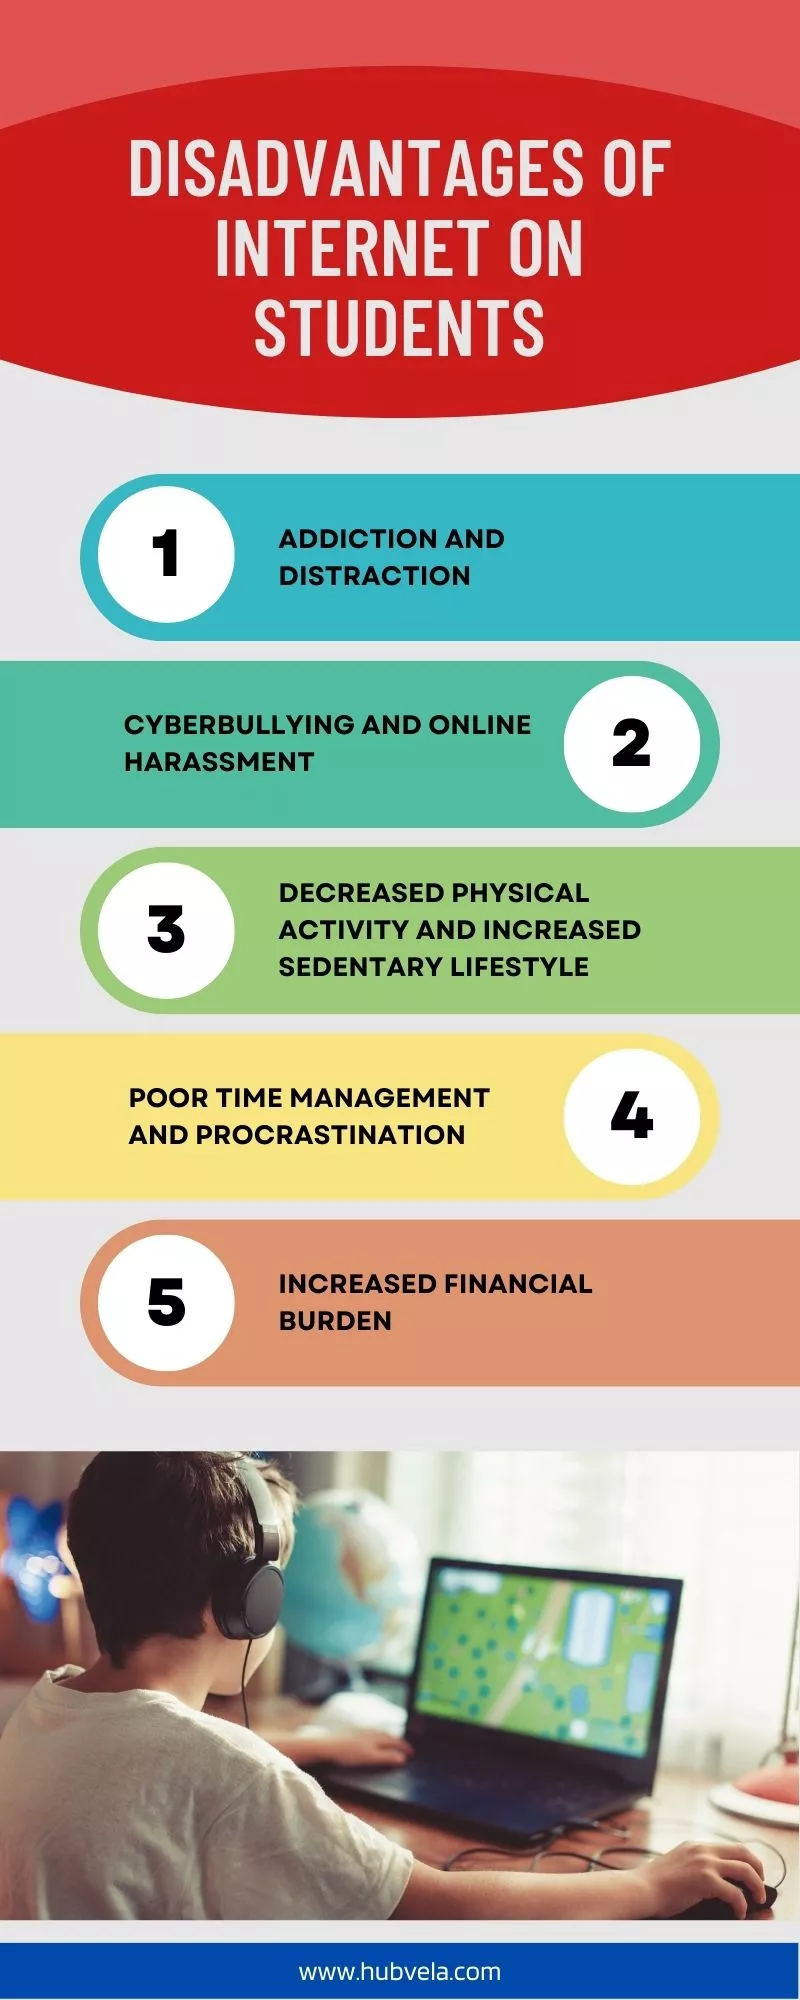 Disadvantages of Internet on Students Infographic